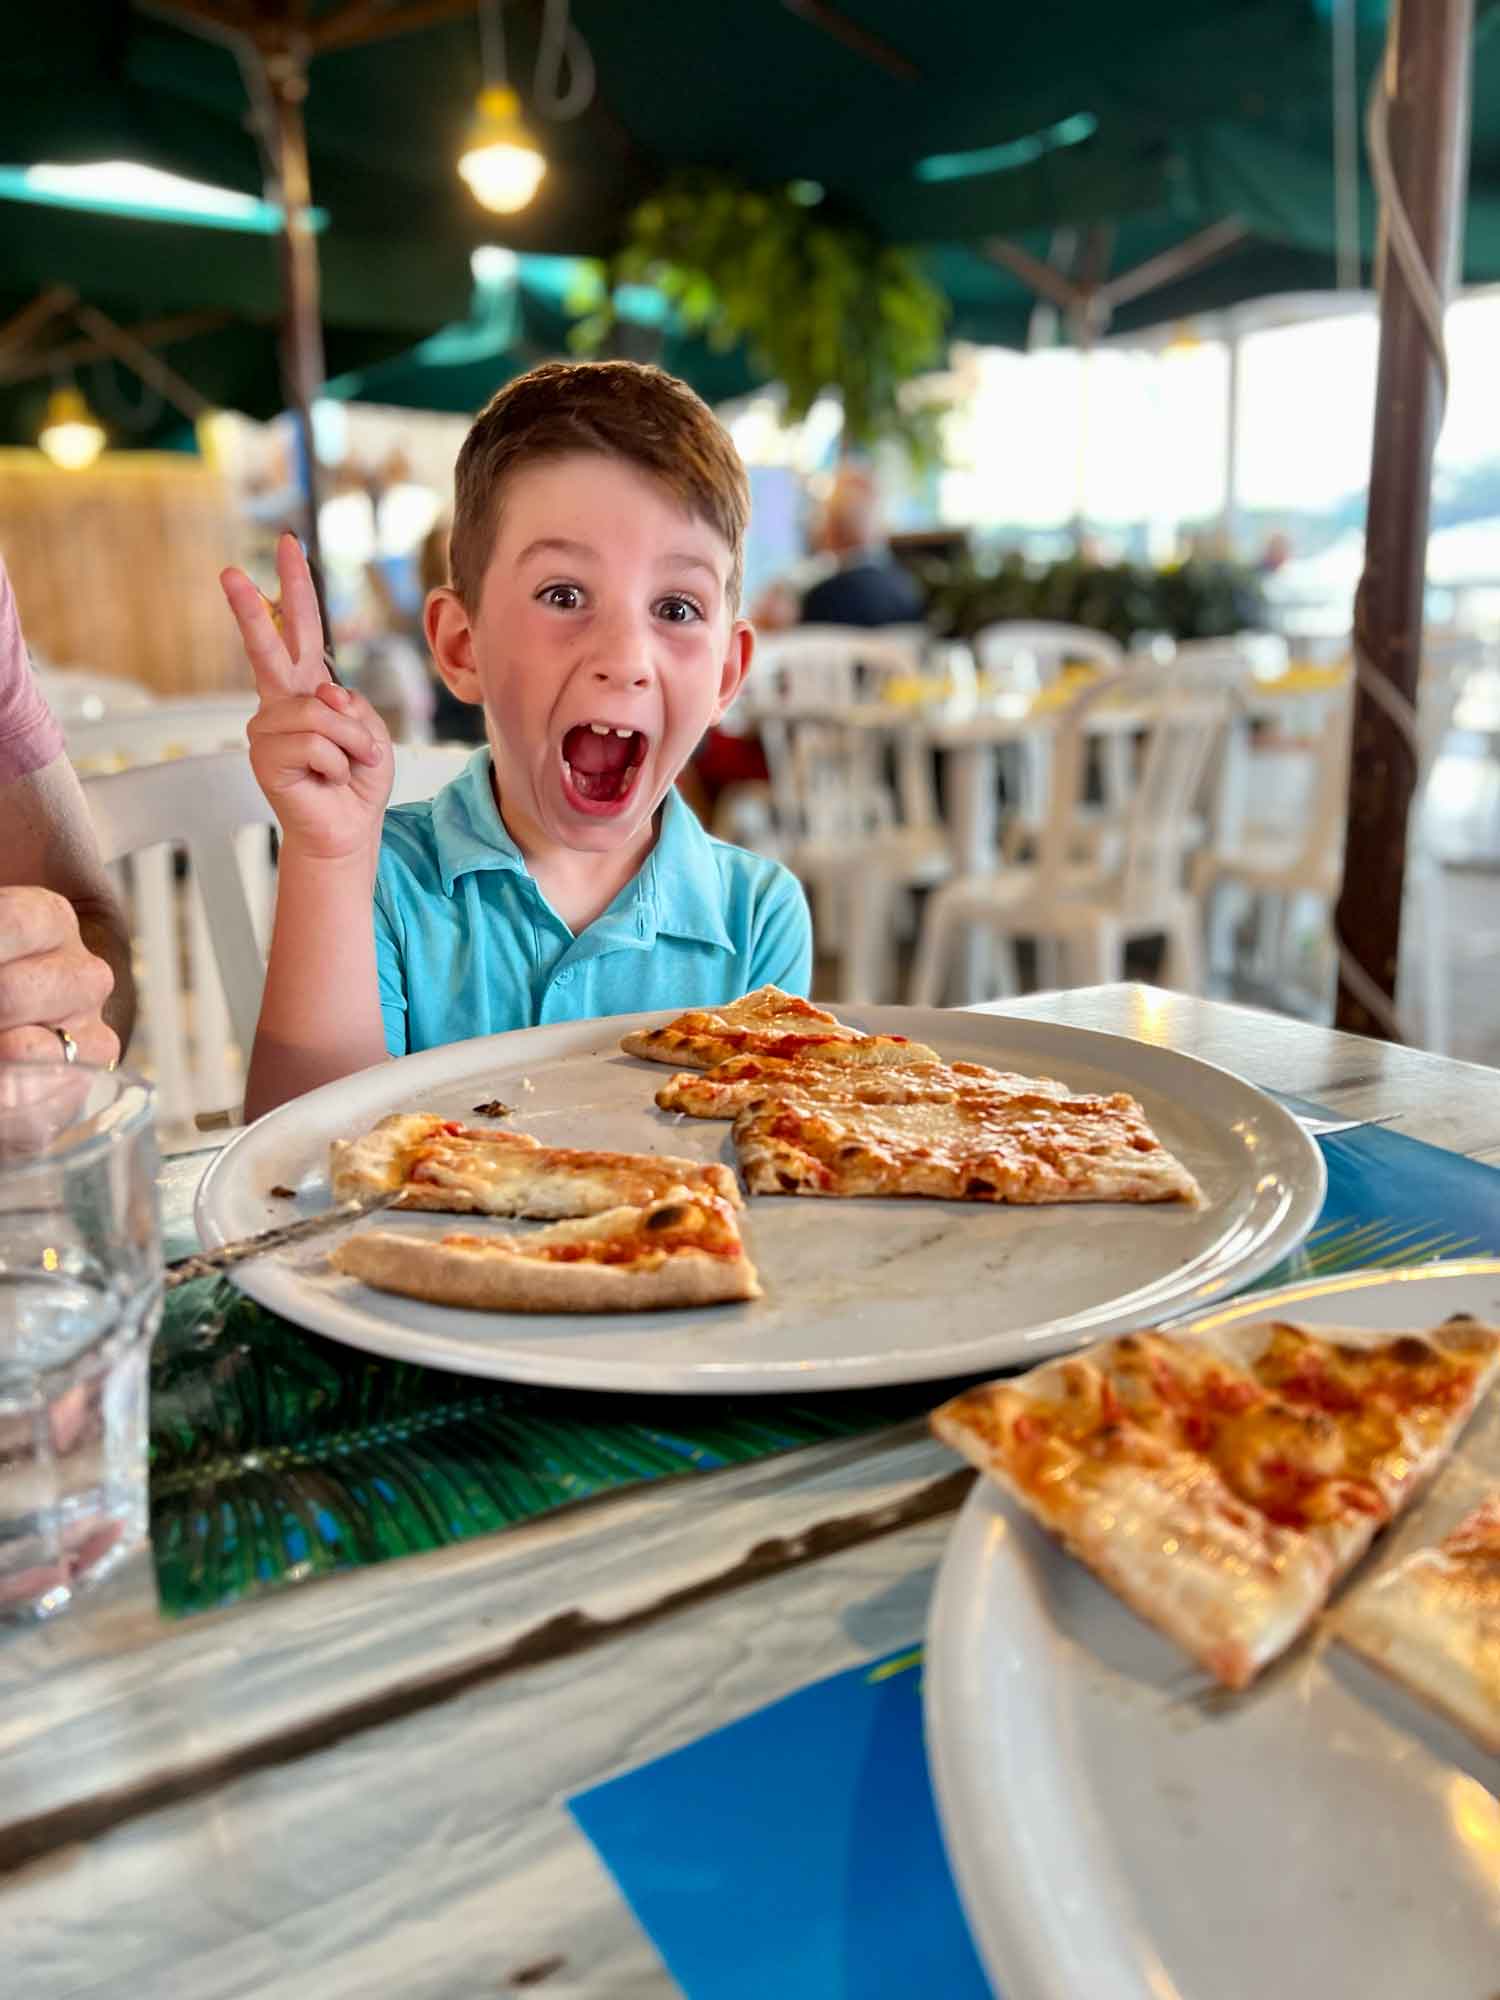 Little boy with excited face and a pizza in front of him